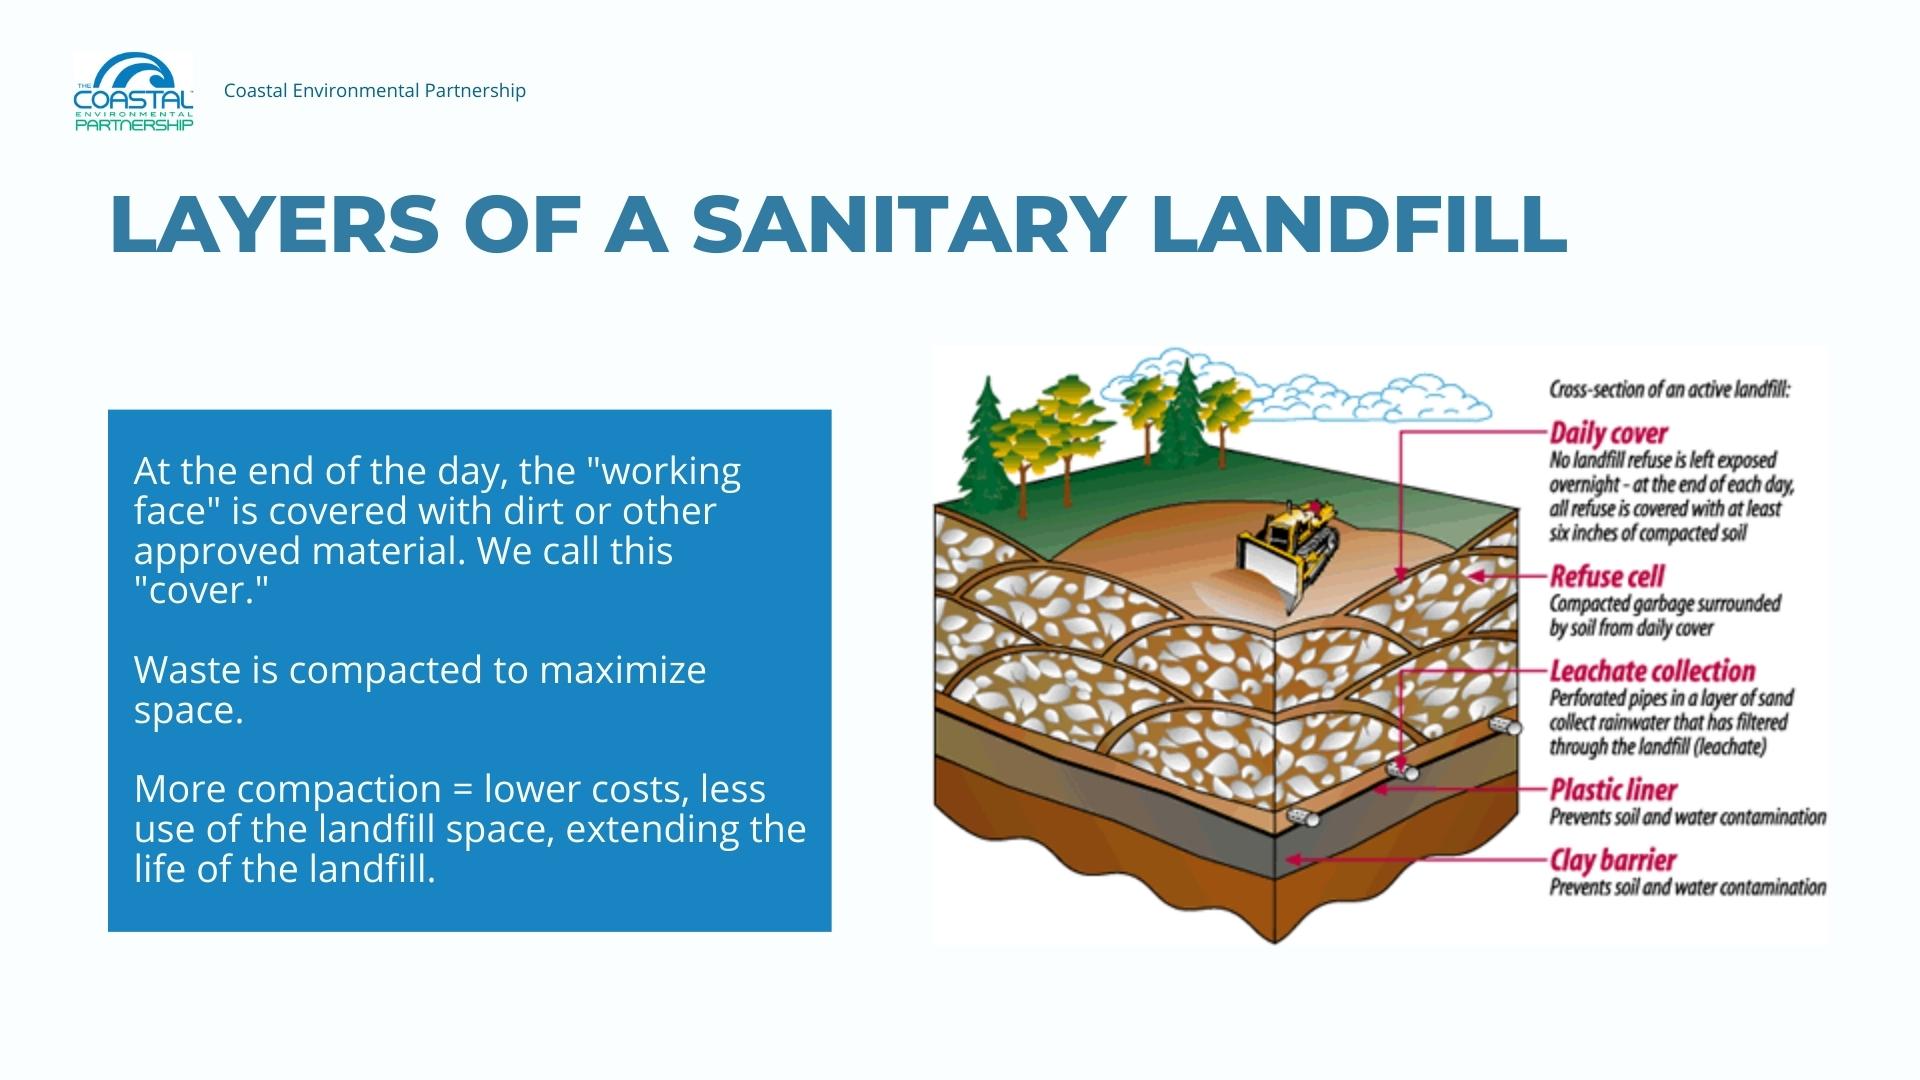 cross-section of landfill. Text says: At the end of the day, the "working face" is covered with dirt or other approved material. We call this "cover." Waste is compacted to maximize space. More compaction = lower costs, less use of the landfill space, extending the life of the landfill. 